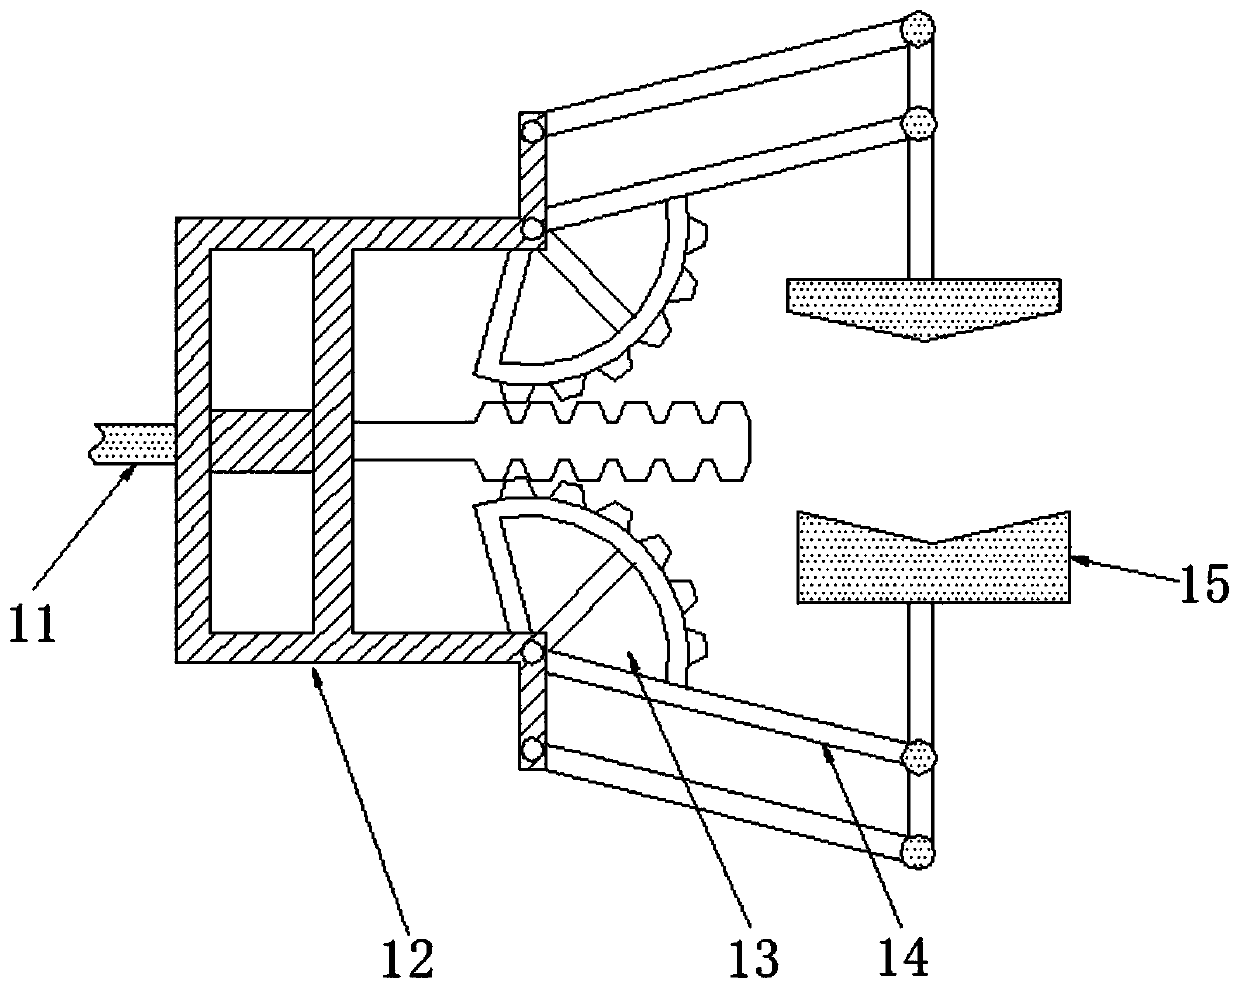 Gravity based device for quantitative weighing and feeding of feed